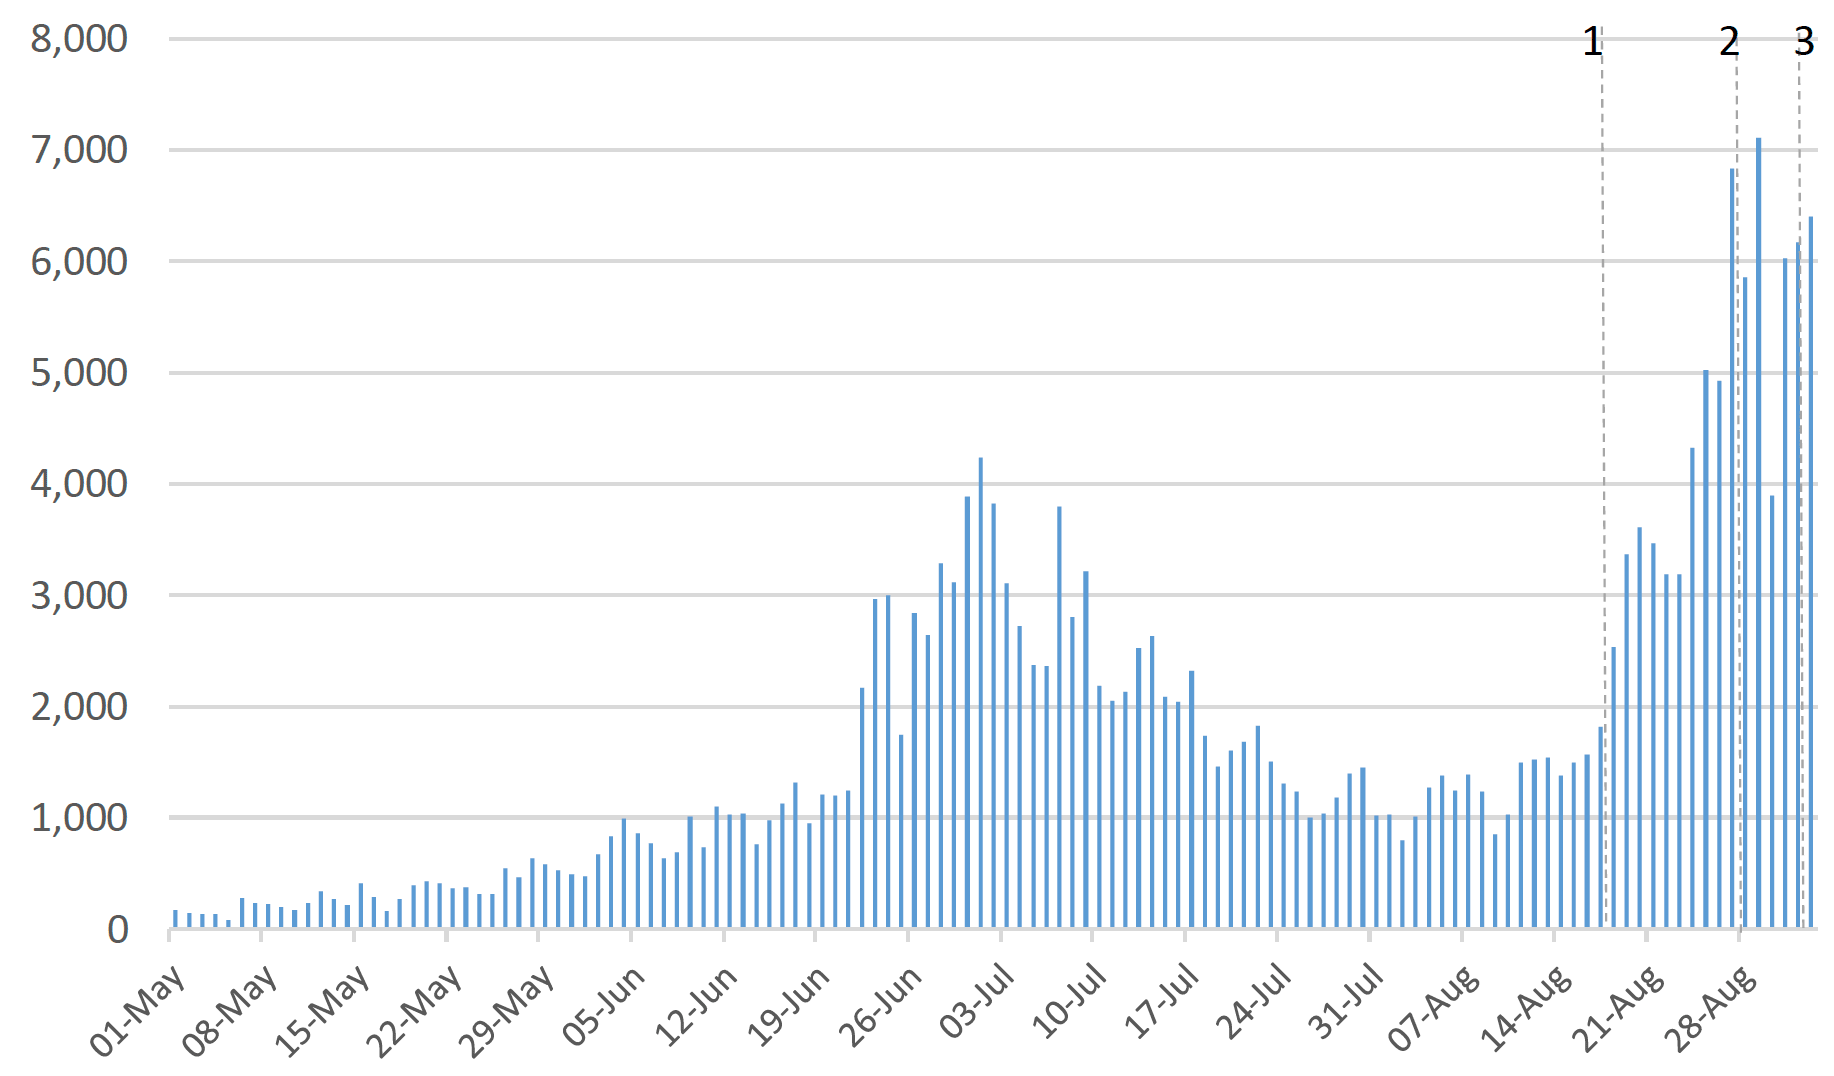 Figure 1. A chart showing the number of cases reported in Scotland between May and September, and the cut off points for each of the modelling inputs.